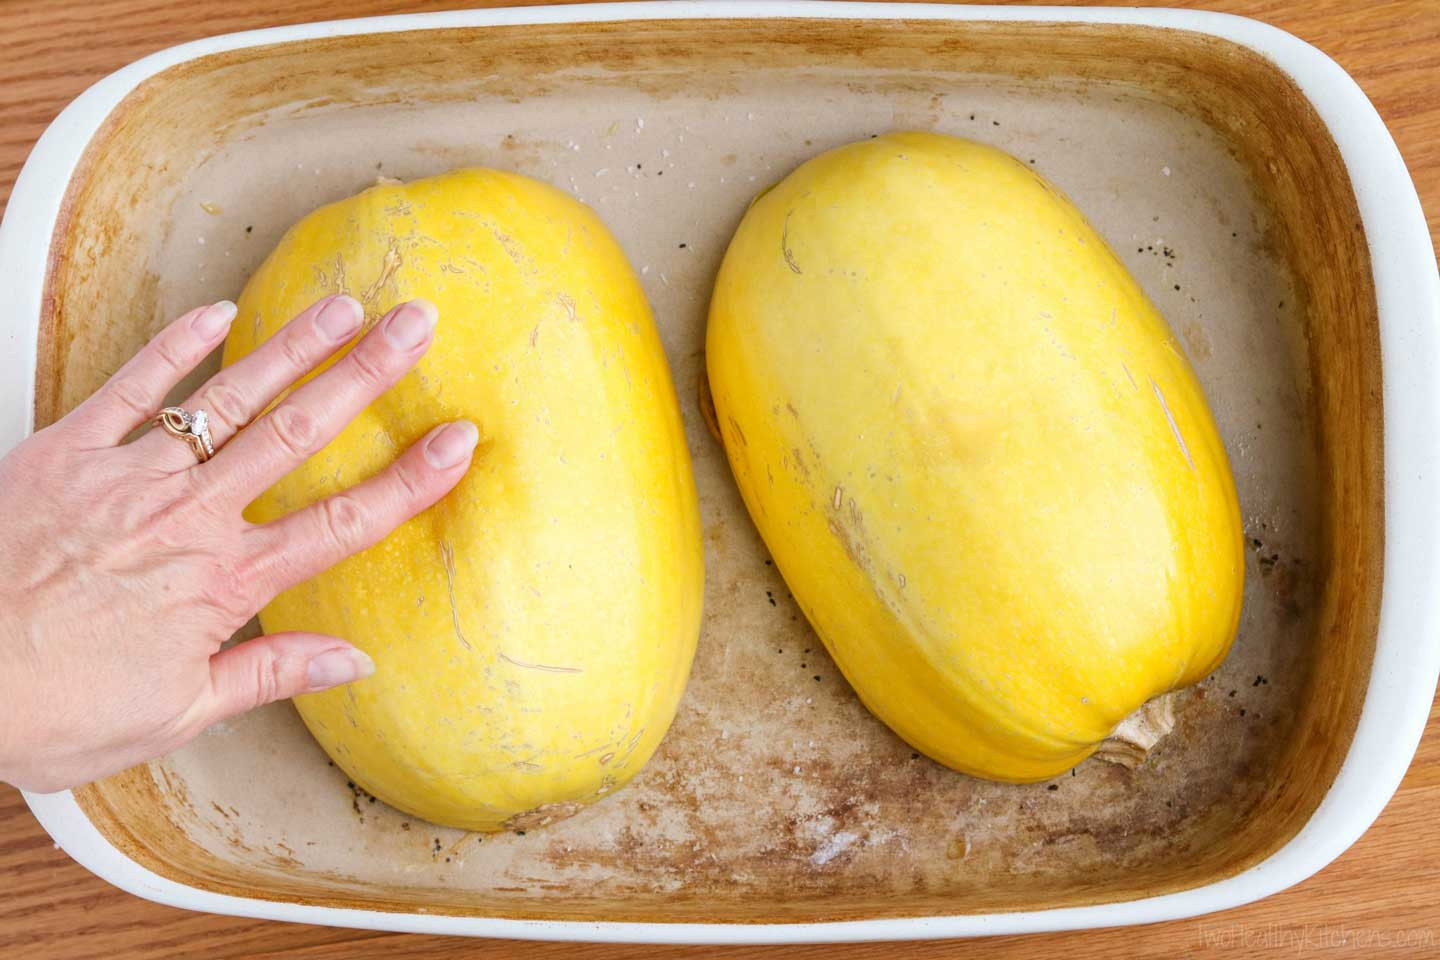 Cooking Spaghetti Squash In Microwave
 Microwave Spaghetti Squash with Sage Browned Butter and